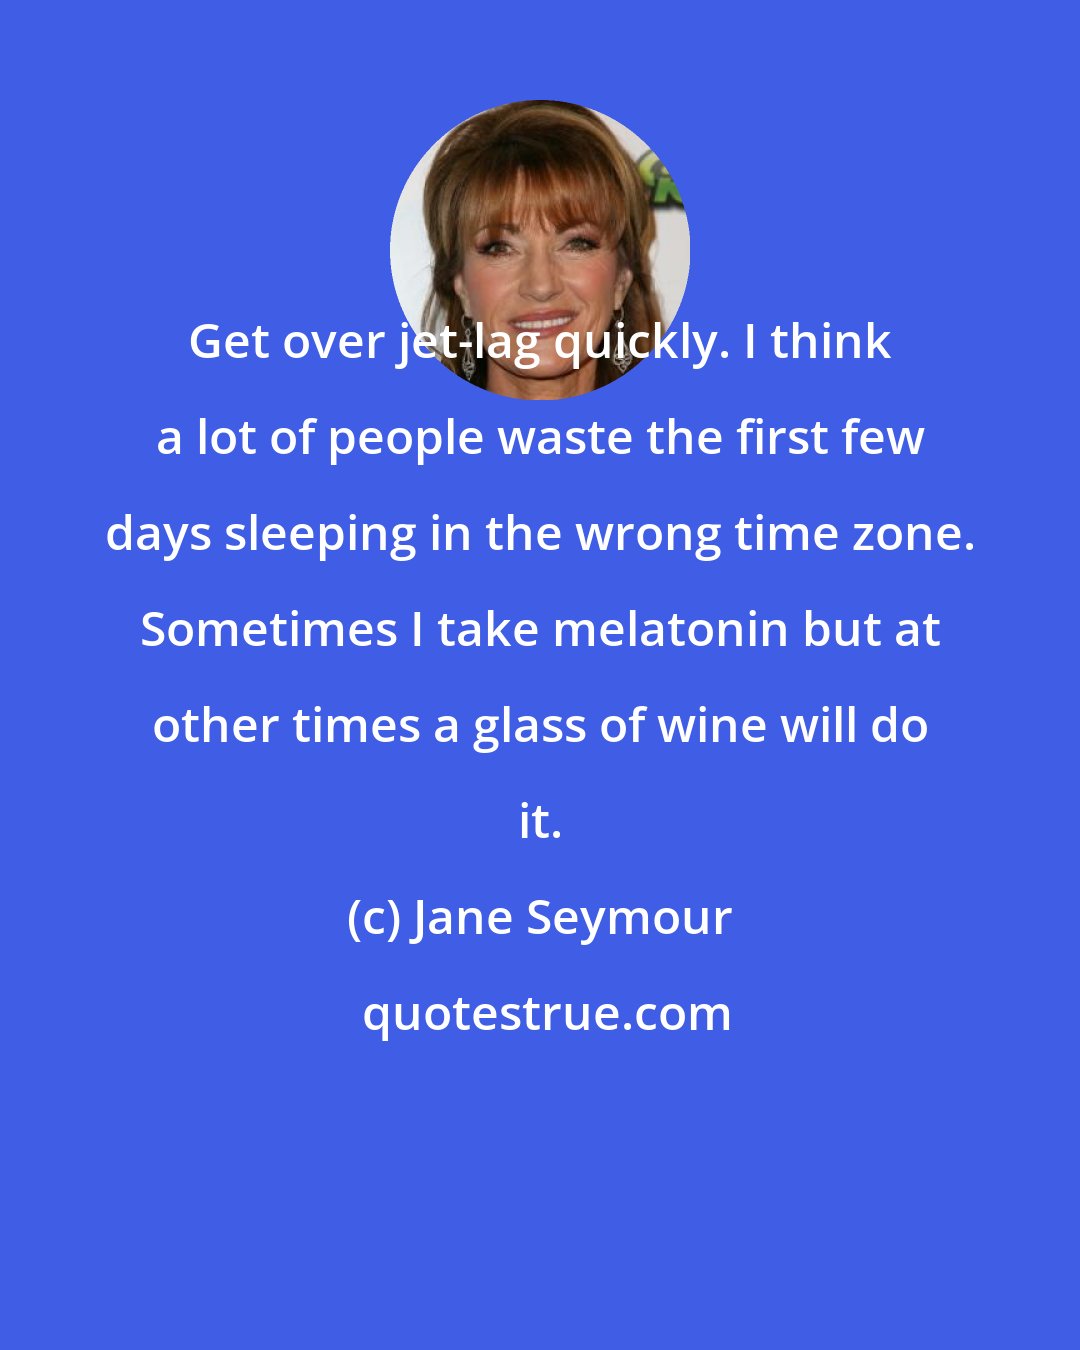 Jane Seymour: Get over jet-lag quickly. I think a lot of people waste the first few days sleeping in the wrong time zone. Sometimes I take melatonin but at other times a glass of wine will do it.